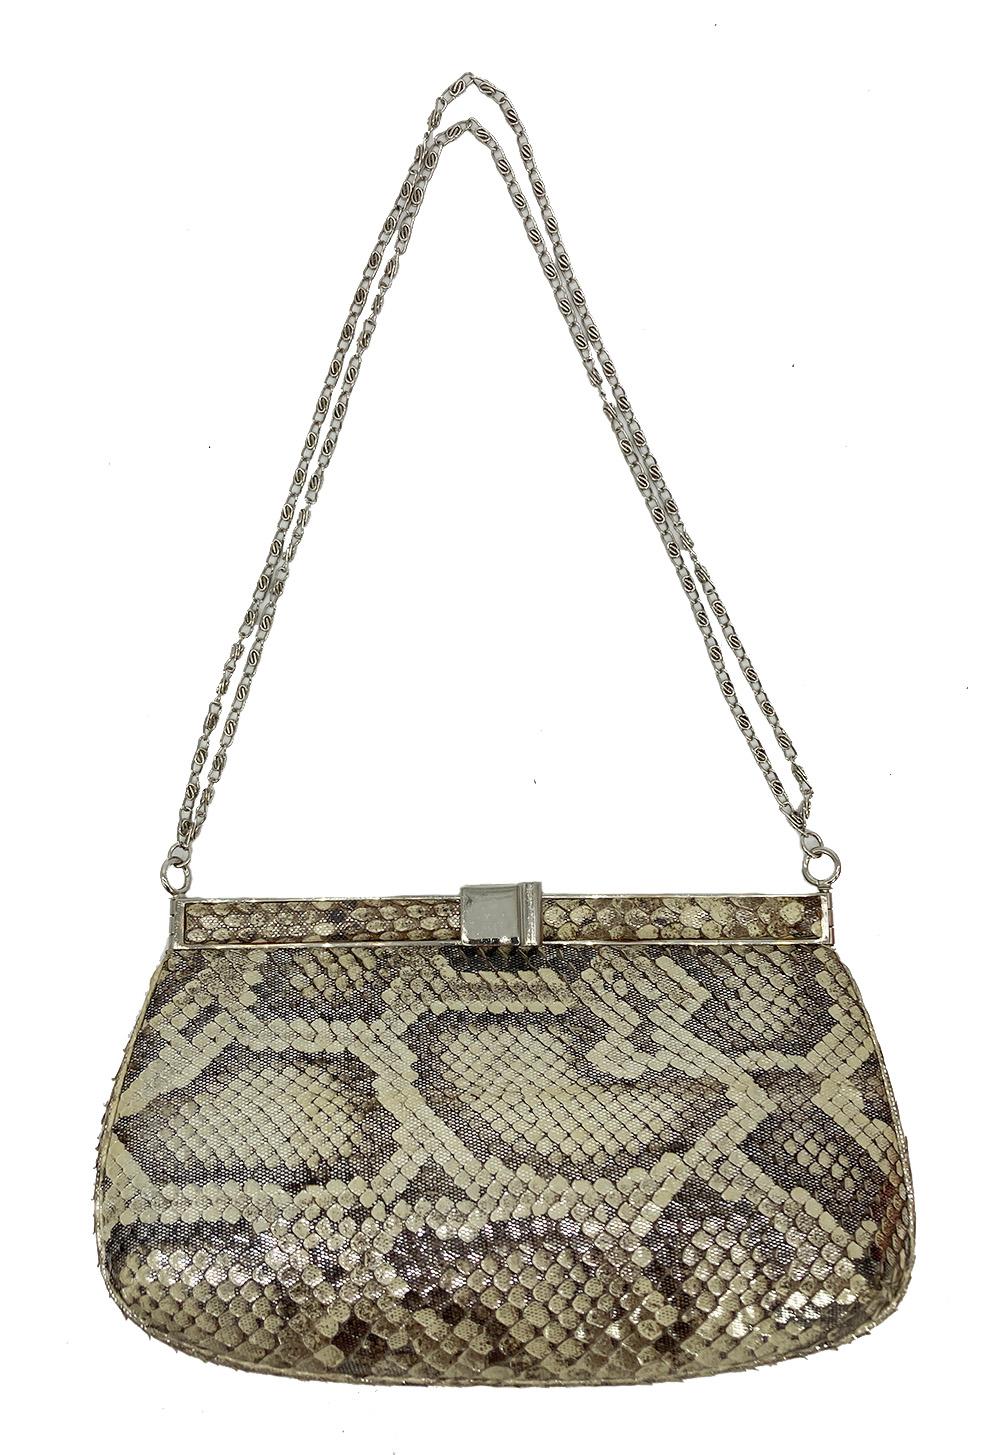 Judith Leiber Metallic Snakeskin Shoulder Bag in good condition. Metallic beige and gray snakeskin exterior trimmed with silver hardware and an attached chain shoulder strap. Top lift latch closure opens 4 top hinges to a beige satin interior with 2